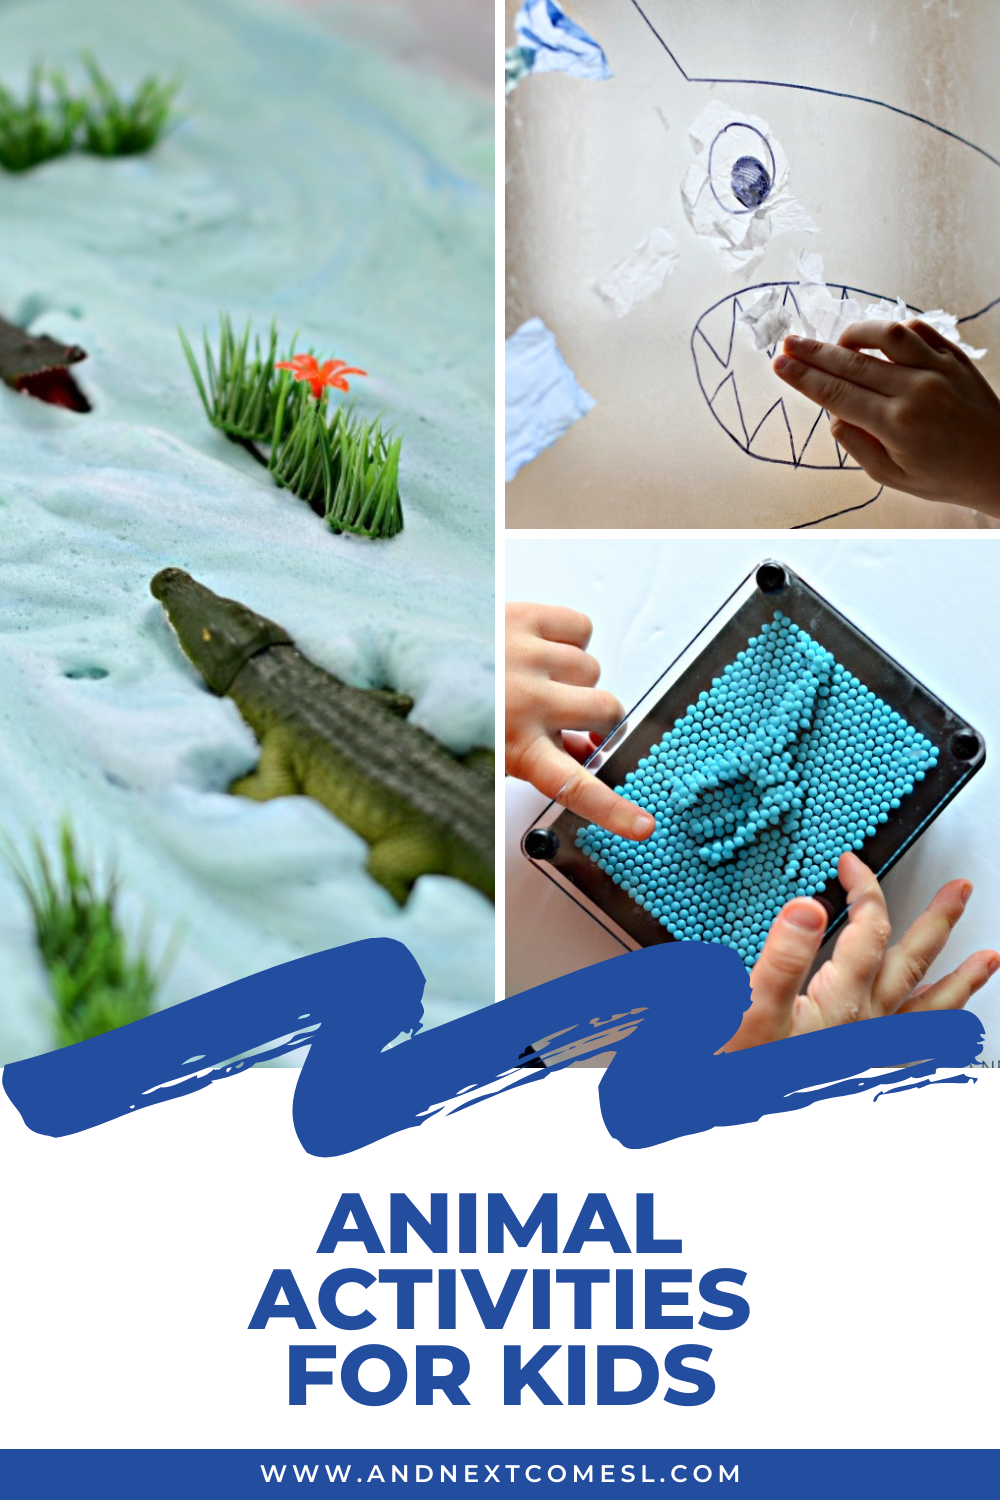 Animal activities, crafts, and printables for kids